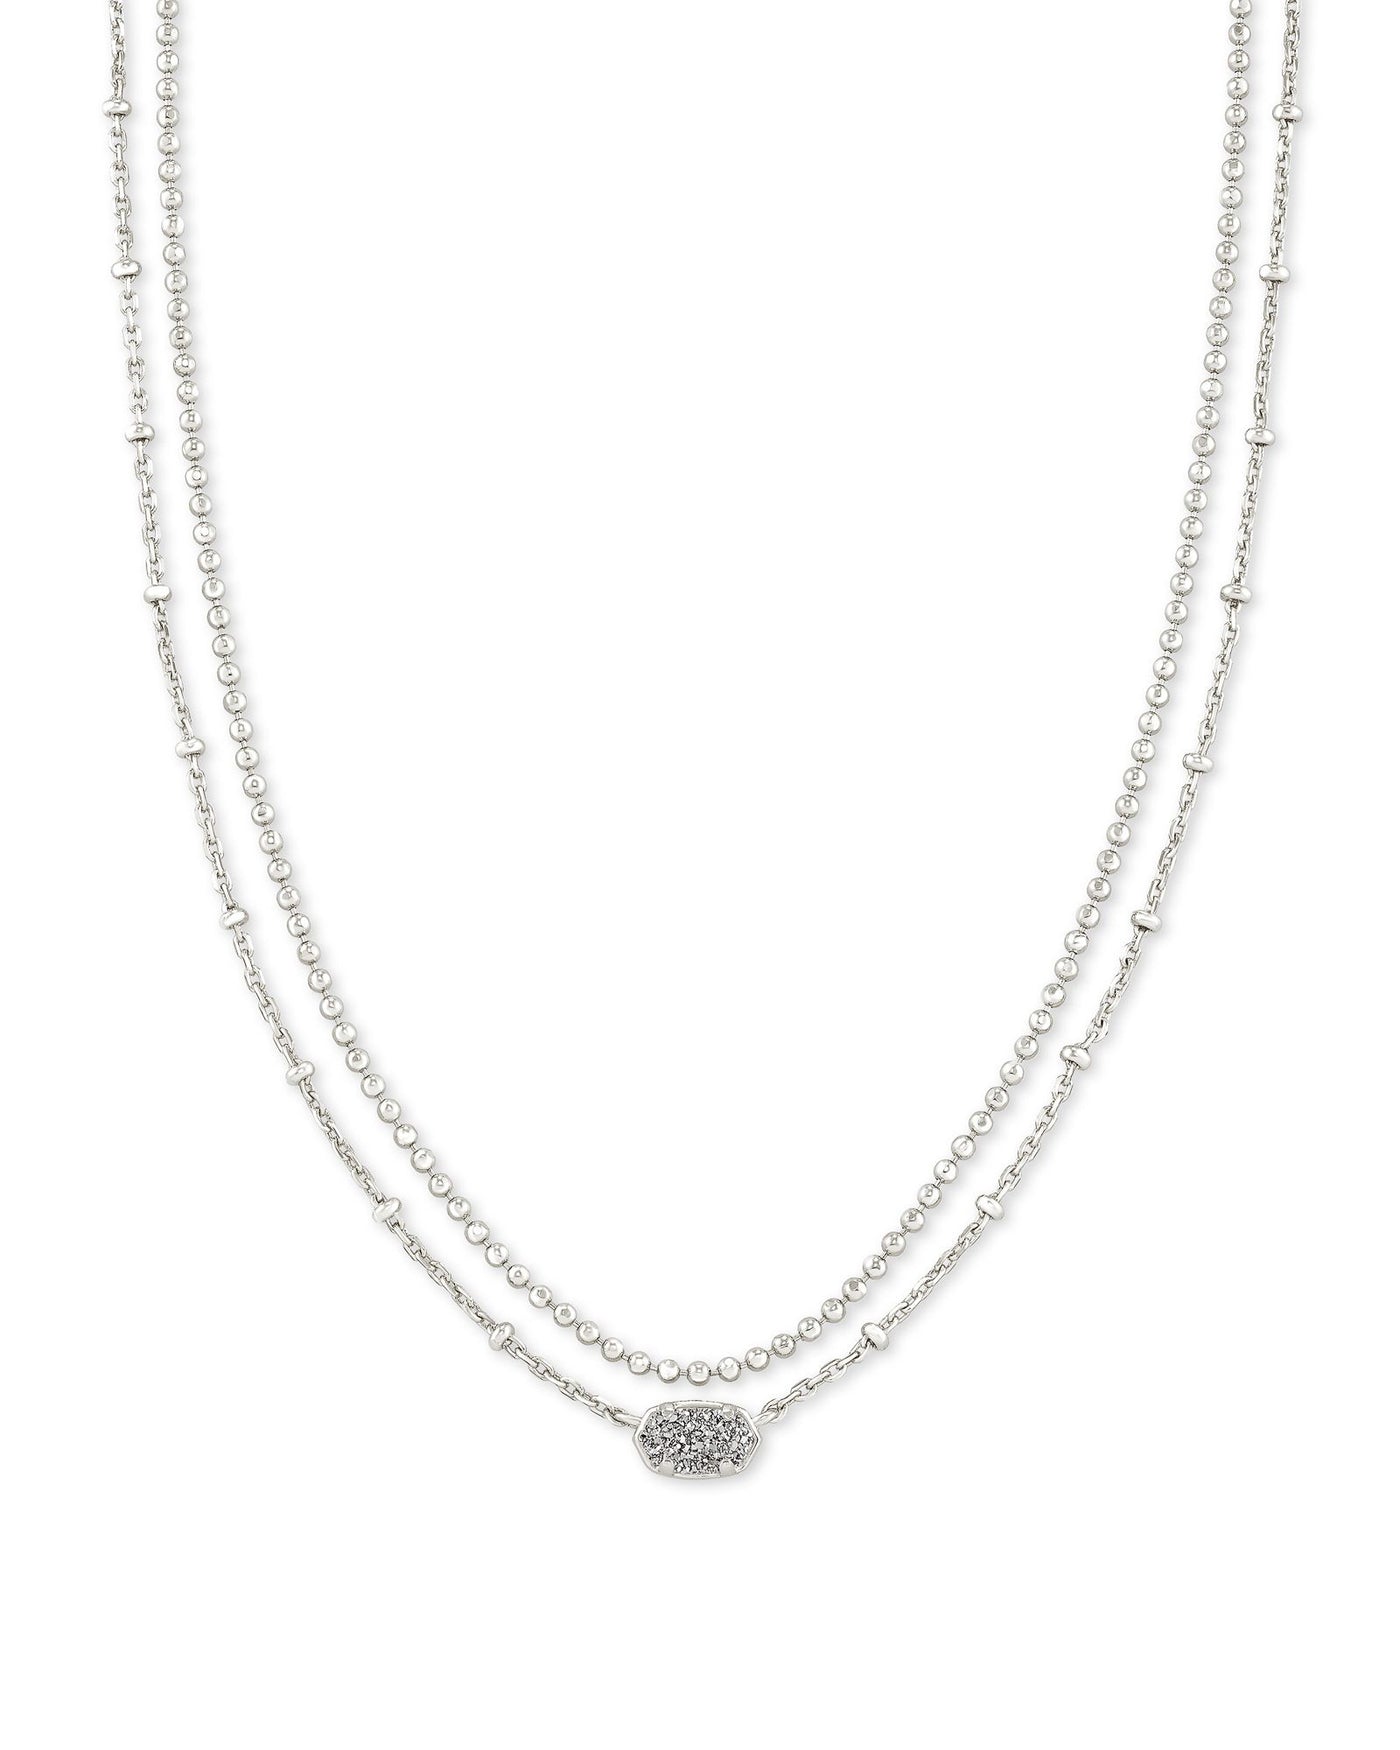 Emilie Multi-Strand Necklace Silver Platinum Drusy on white background, front view.